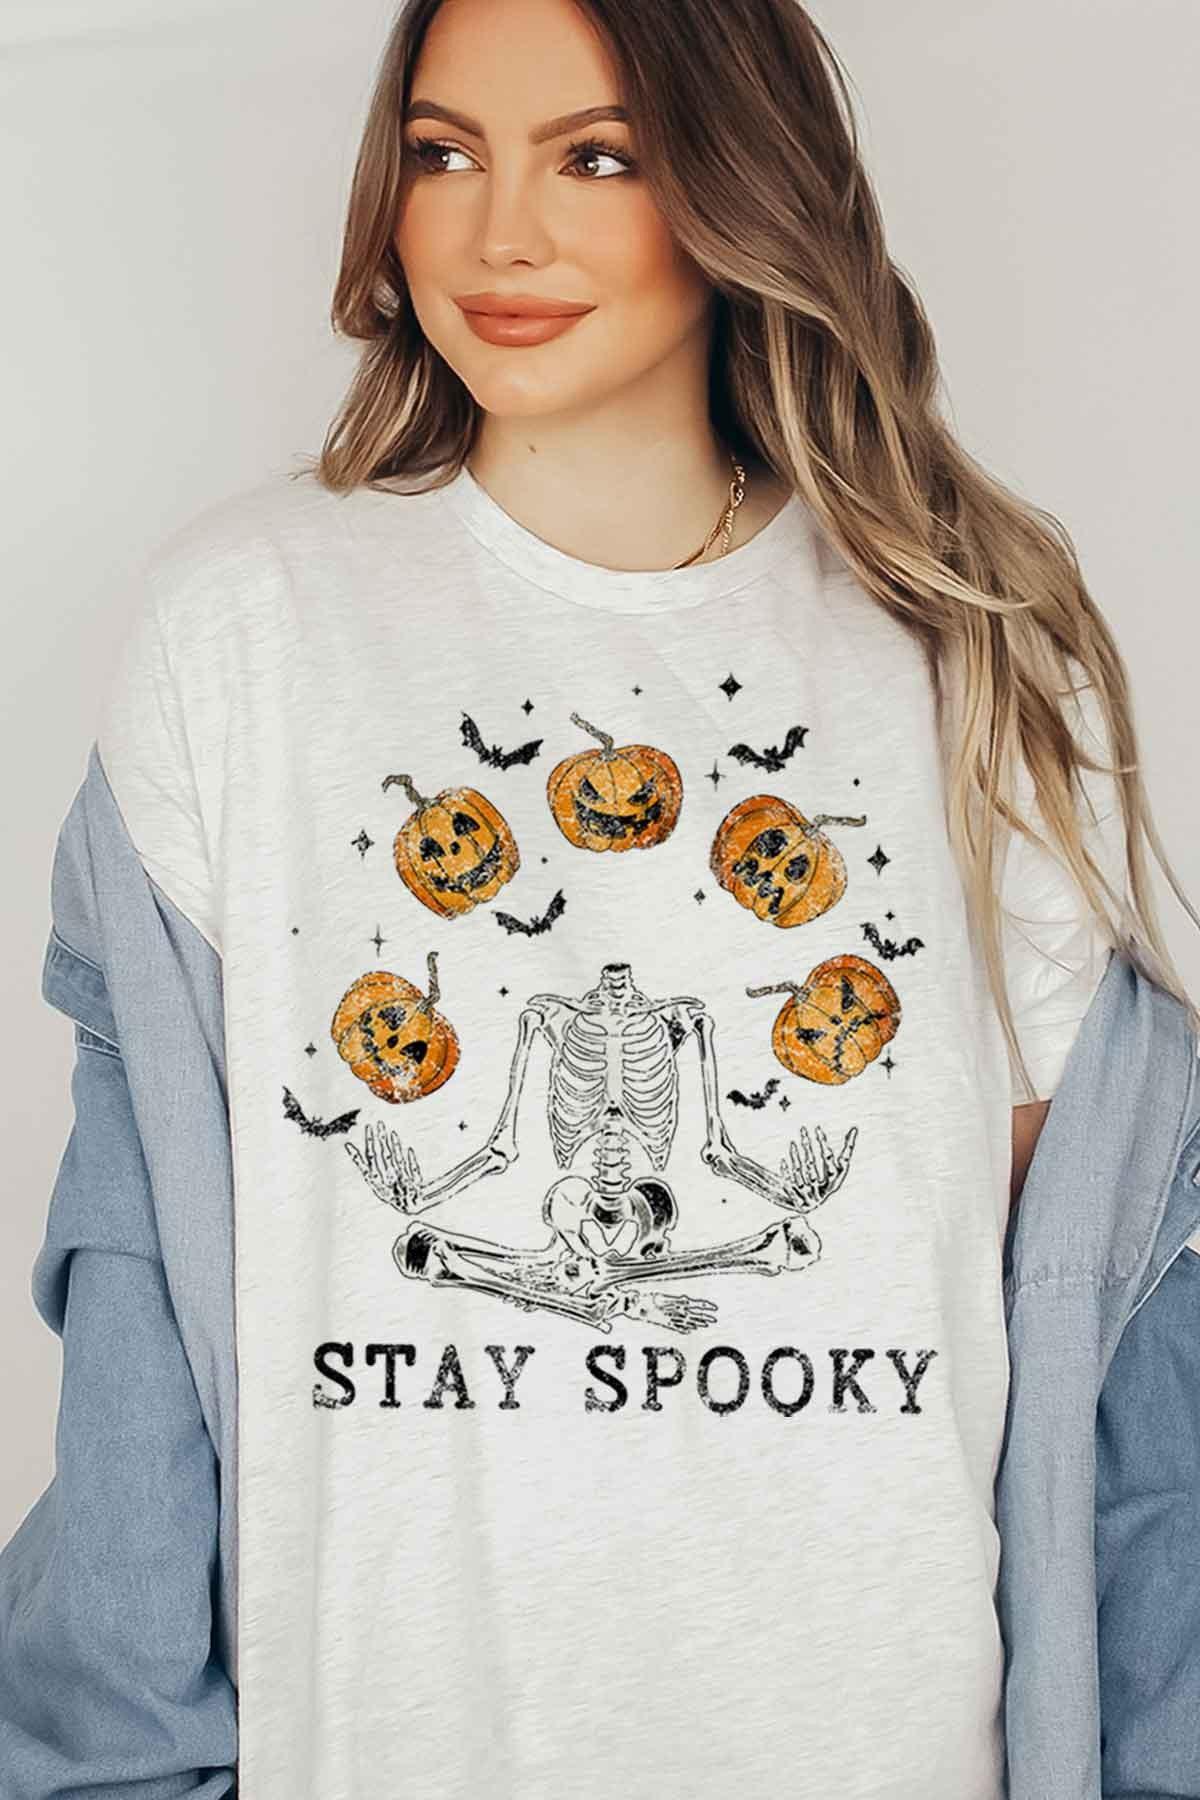 STAY SPOOKY TEE (PLUS AVAILABLE) , T-SHIRT , it’sNOMB. The Label , DANCING SKELETONS TEE, GRAPHIC, GRAPHIC TEE, graphic tees, HALLOWEEN, HALLOWEEN TEES, HALLOWEEN TSHIRTS, SKELETONS AND PUMPKINS TEE, STAY SPOOKY TEE, T-SHIRT, T-SHIRTS, TEES , It's NOMB , itsnomb.com